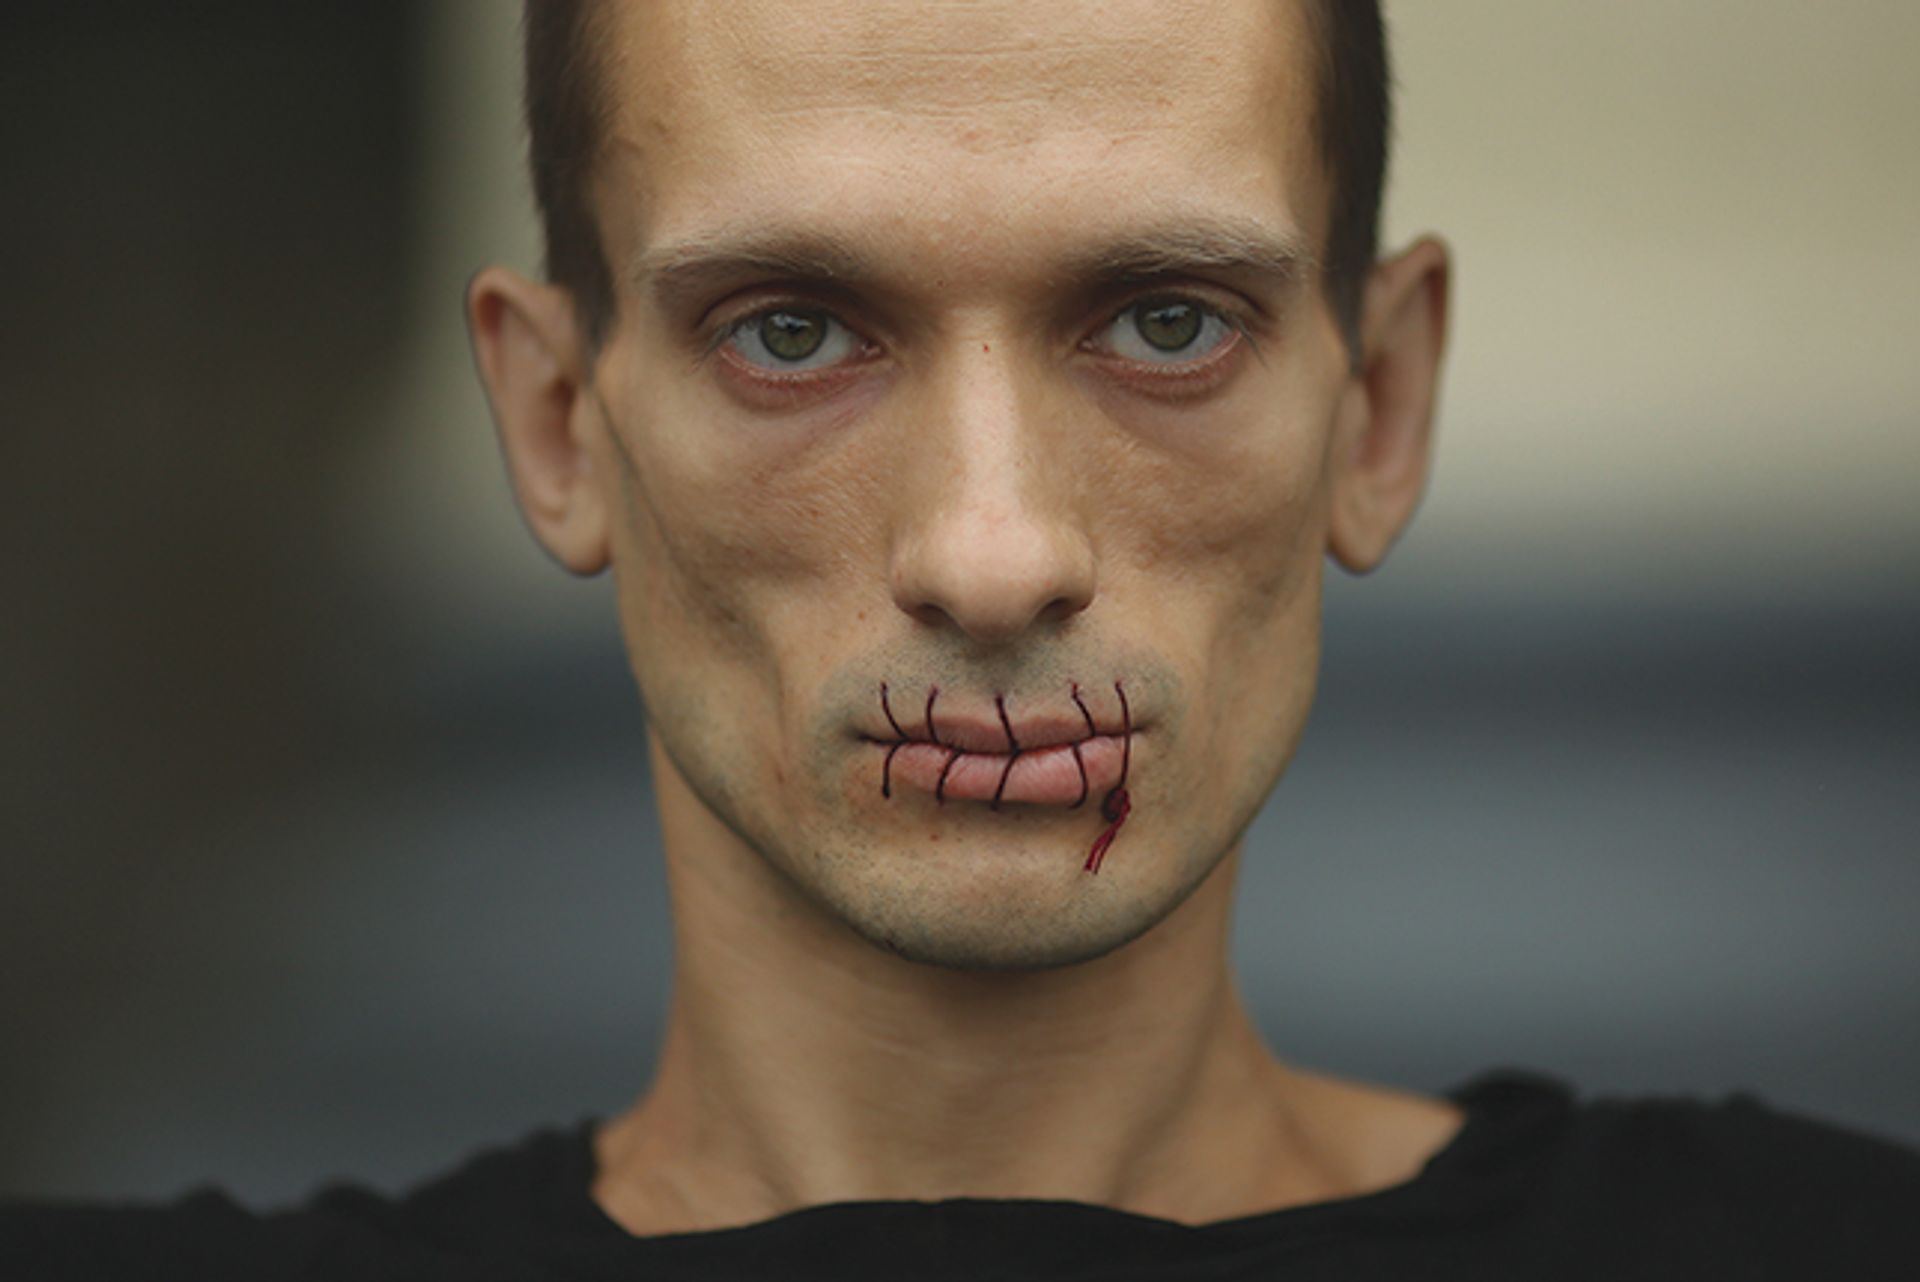 Pyotr Pavlensky’s 2012 performance, Seam; the artist’s show at a/political’s London space is backed by Babestation, with a future collaboration currently under discussion Trend Photo Agency/Reuters